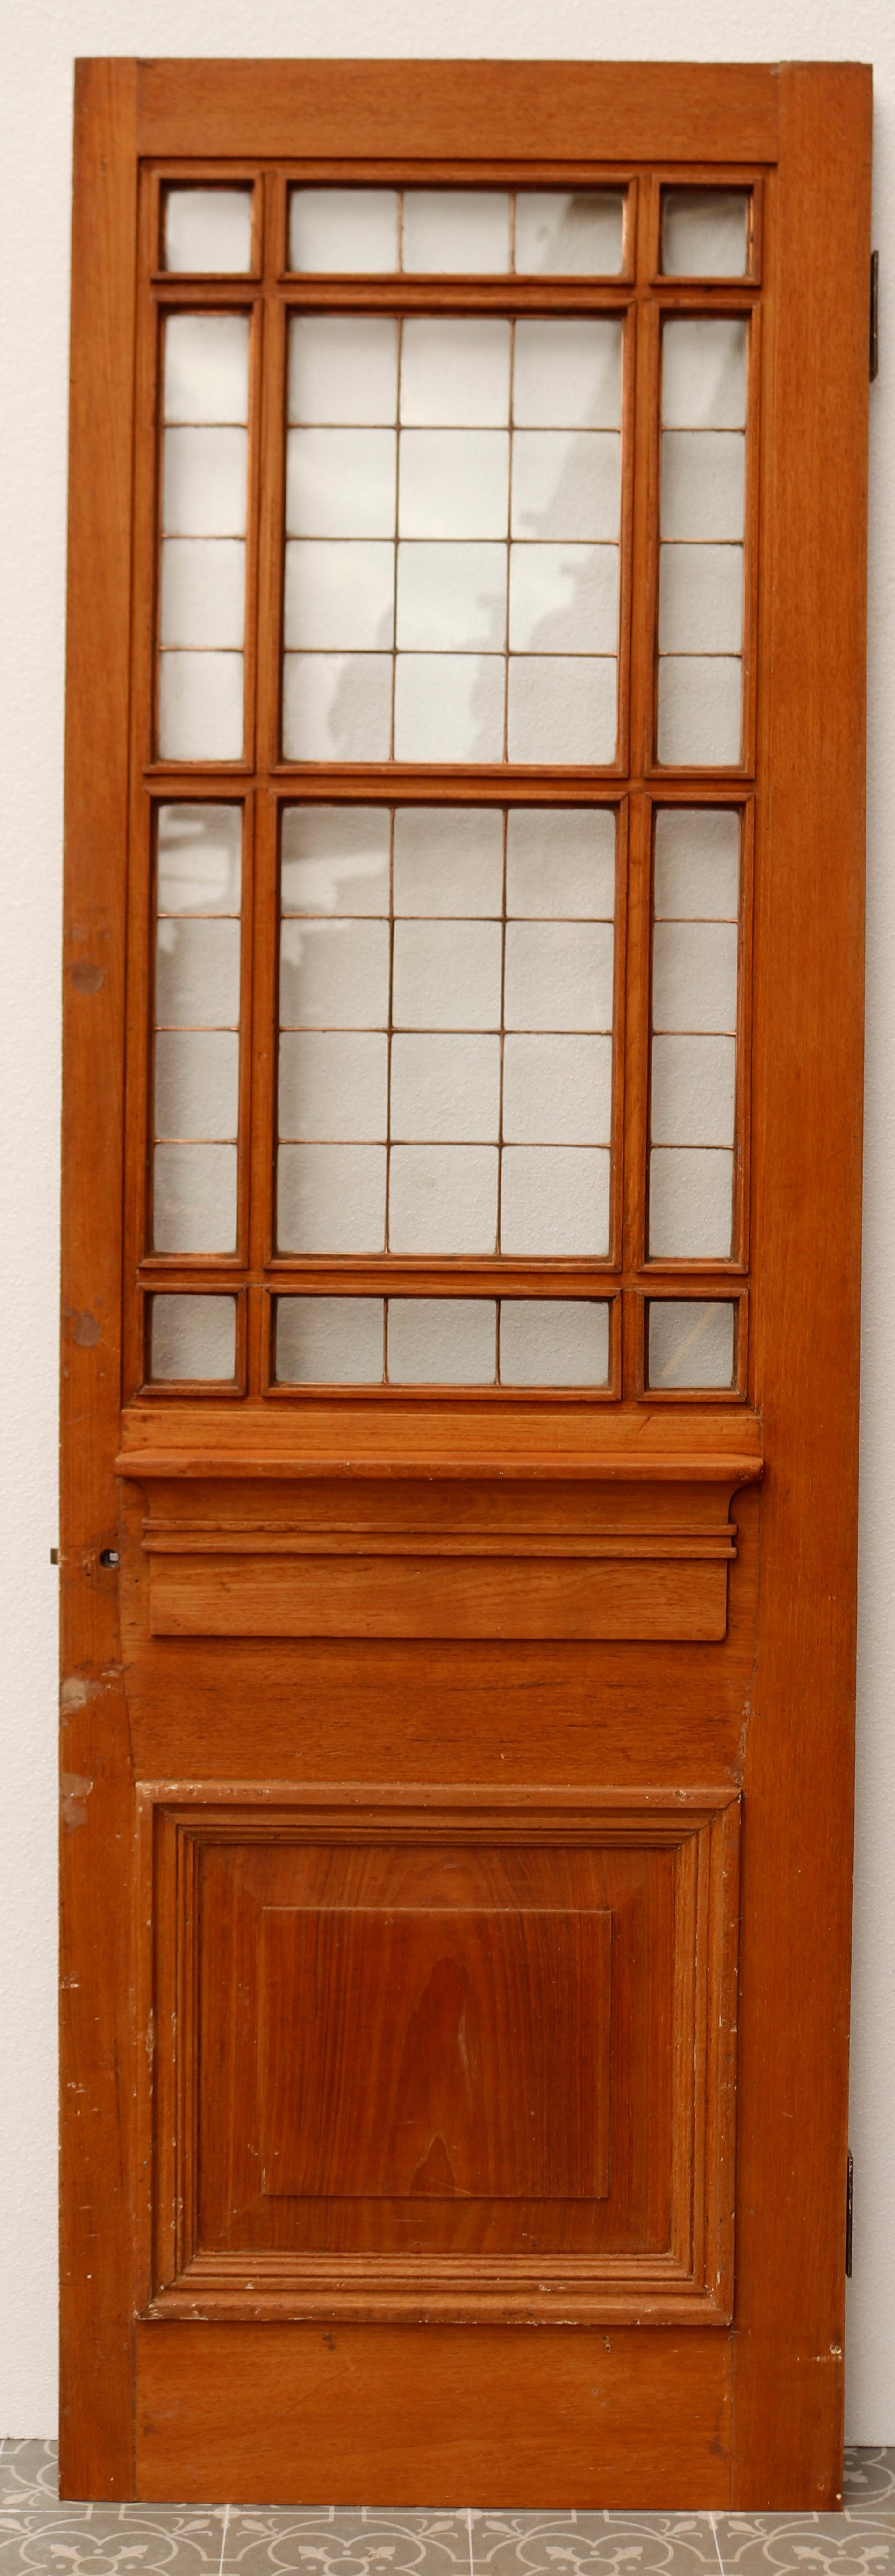 Copper light teak door. A beautiful antique door with applied mouldings, raised and fielded lower panel in an Art Deco fashion.